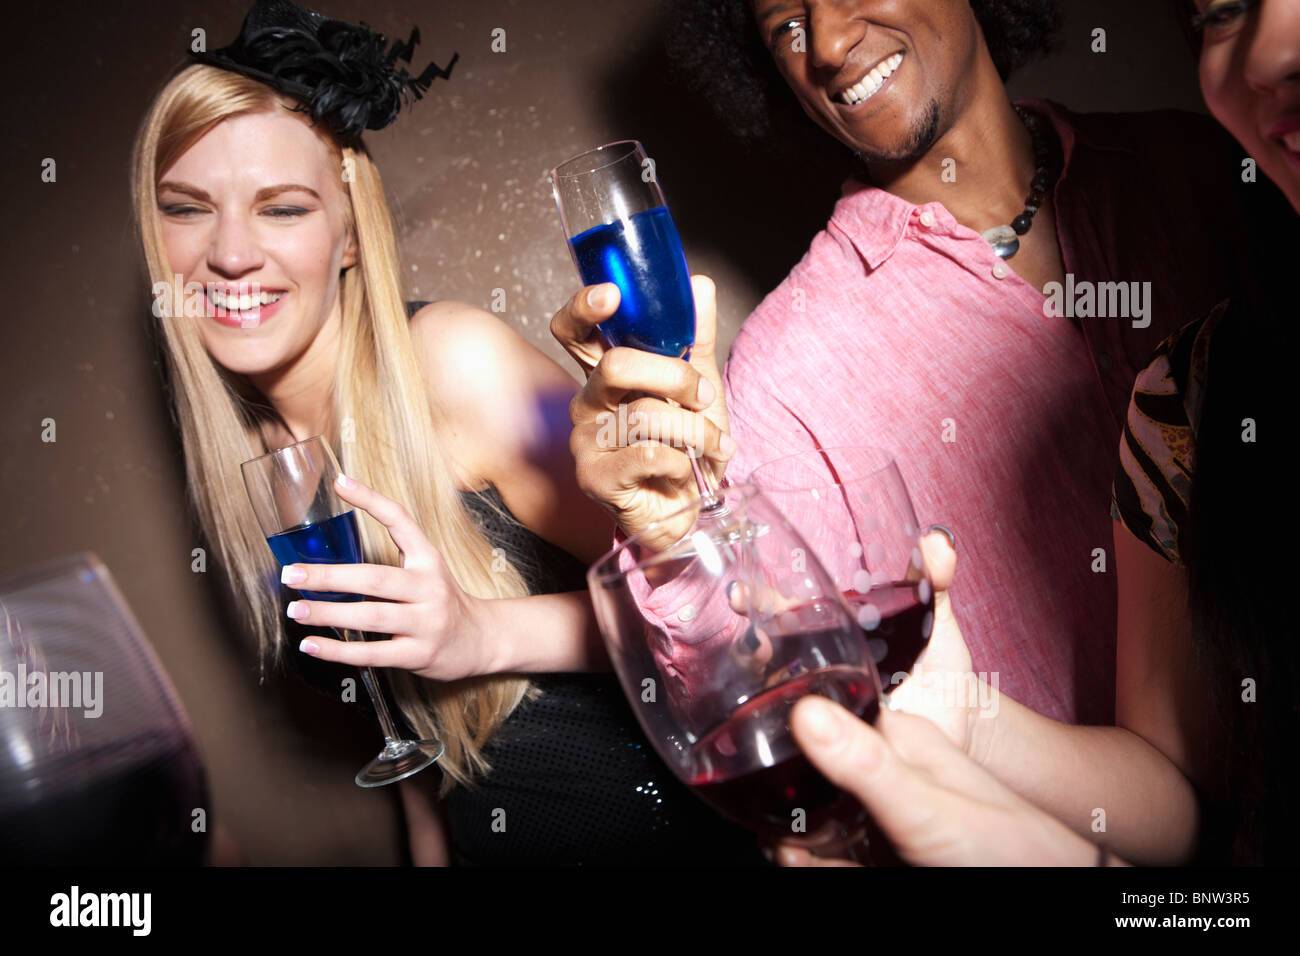 Group of people socializing at a party Banque D'Images